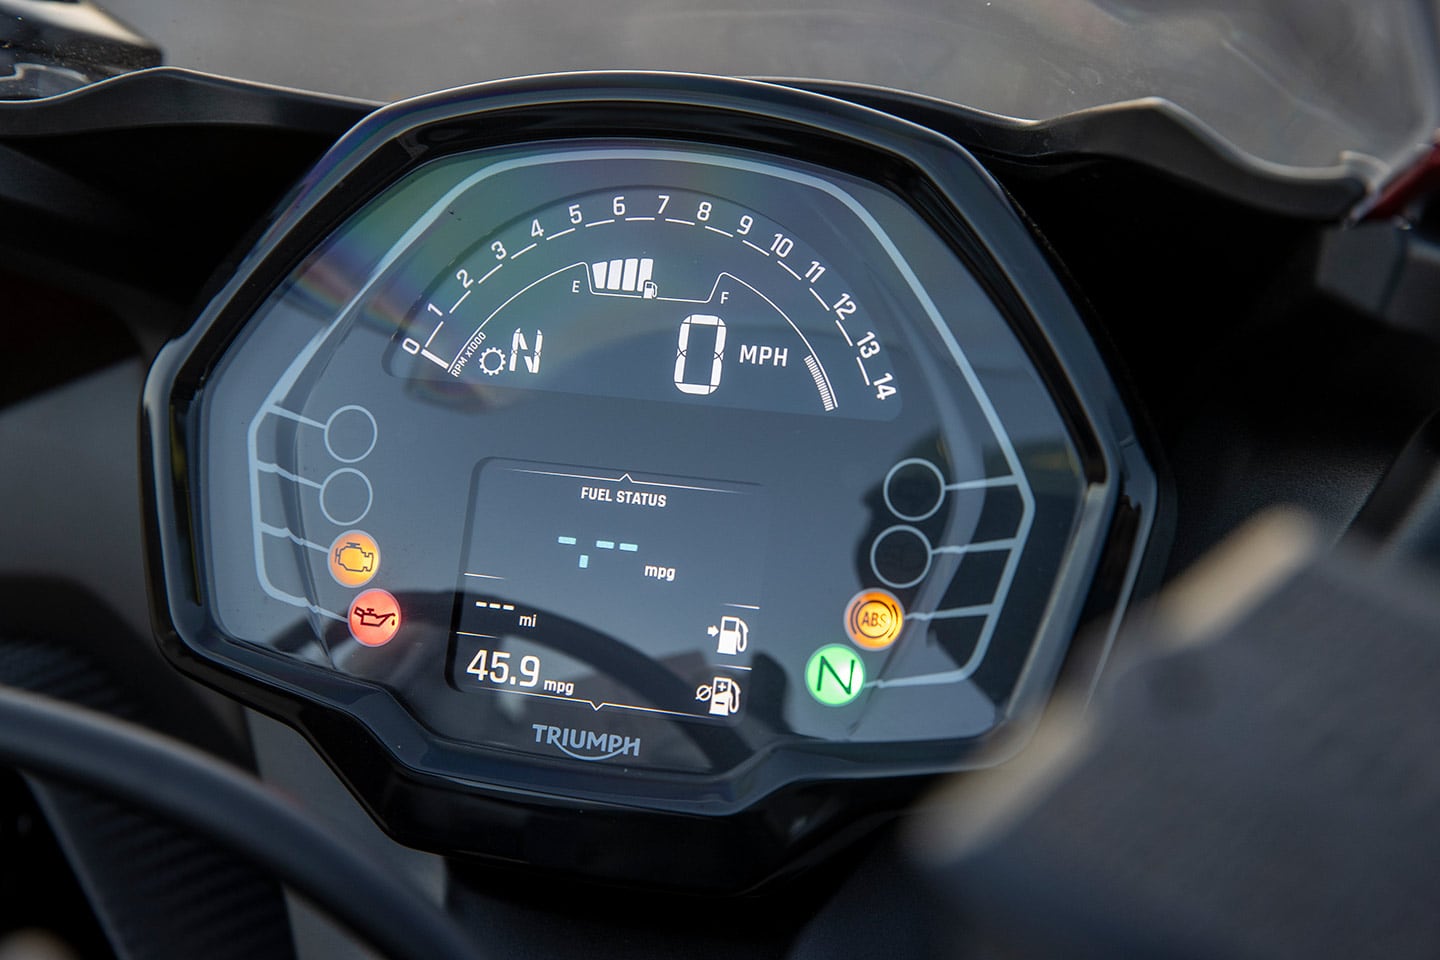 The Daytona 660’s dash sits between the others in terms of functionality and legibility.